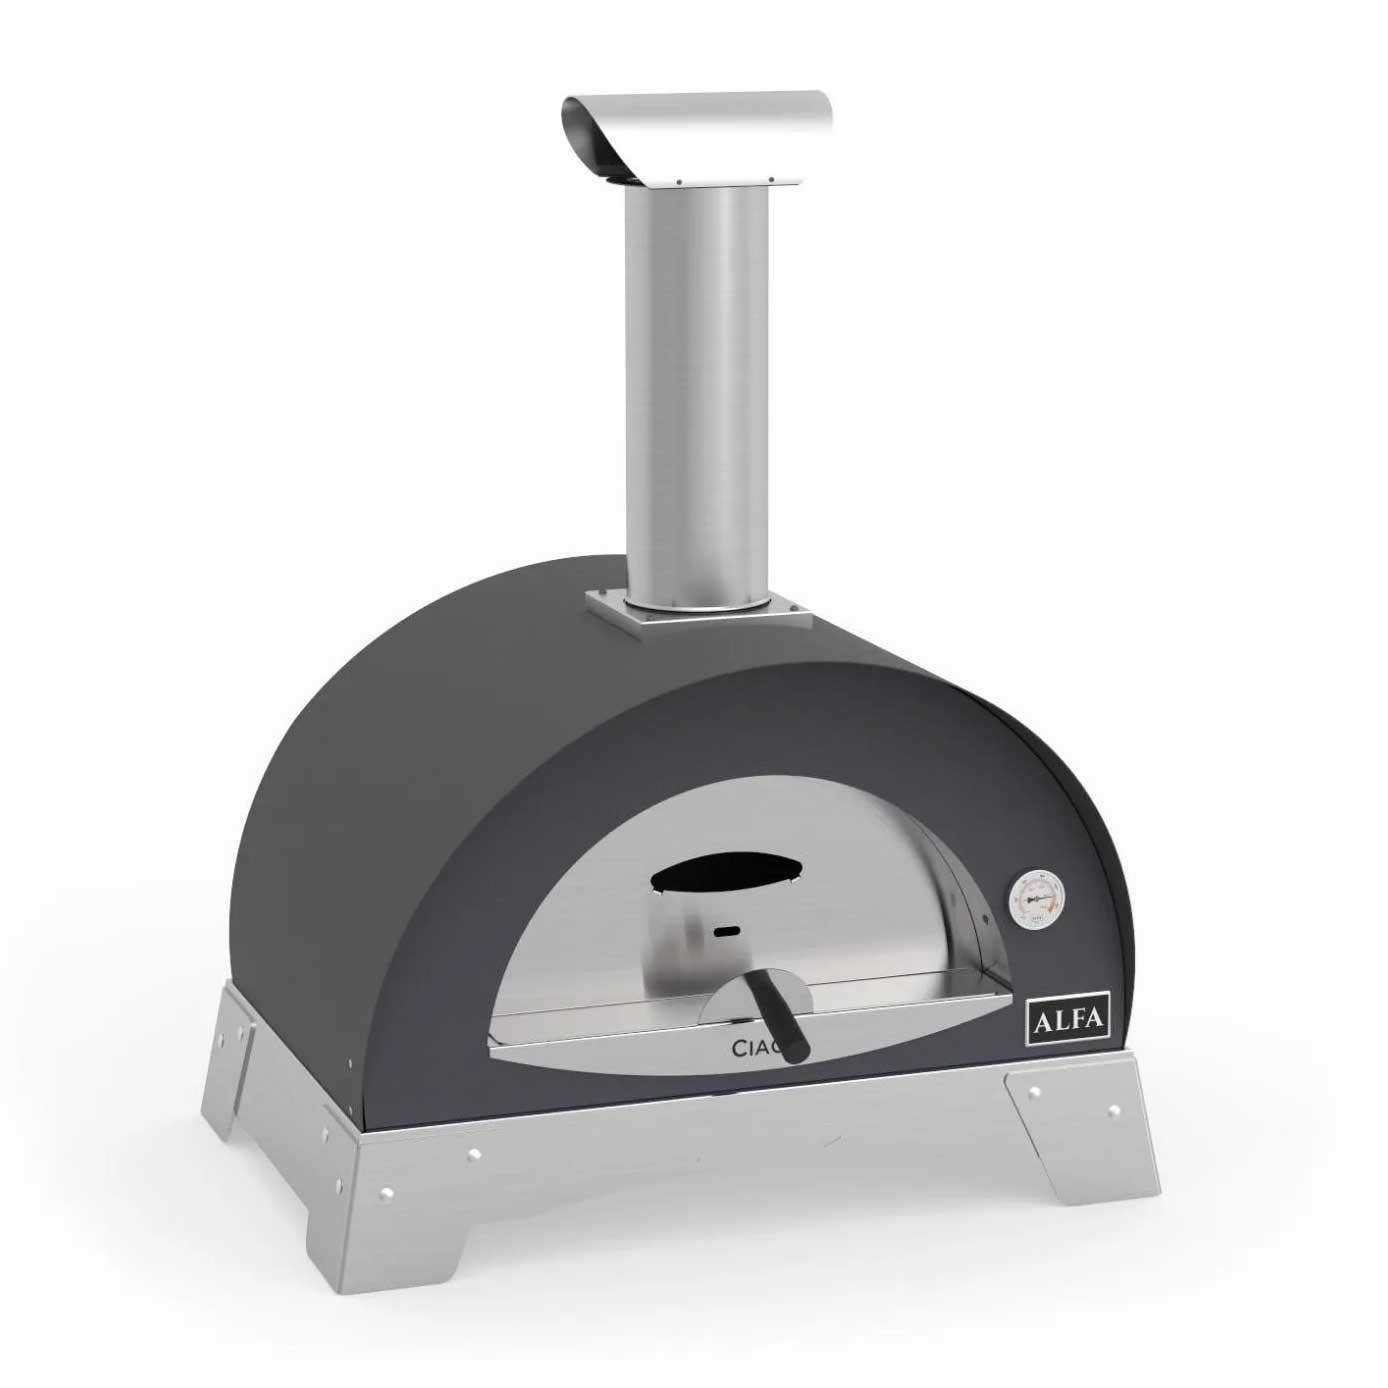 Alfa Ciao Wood Fired Outdoor Pizza Oven Pizza Makers & Ovens